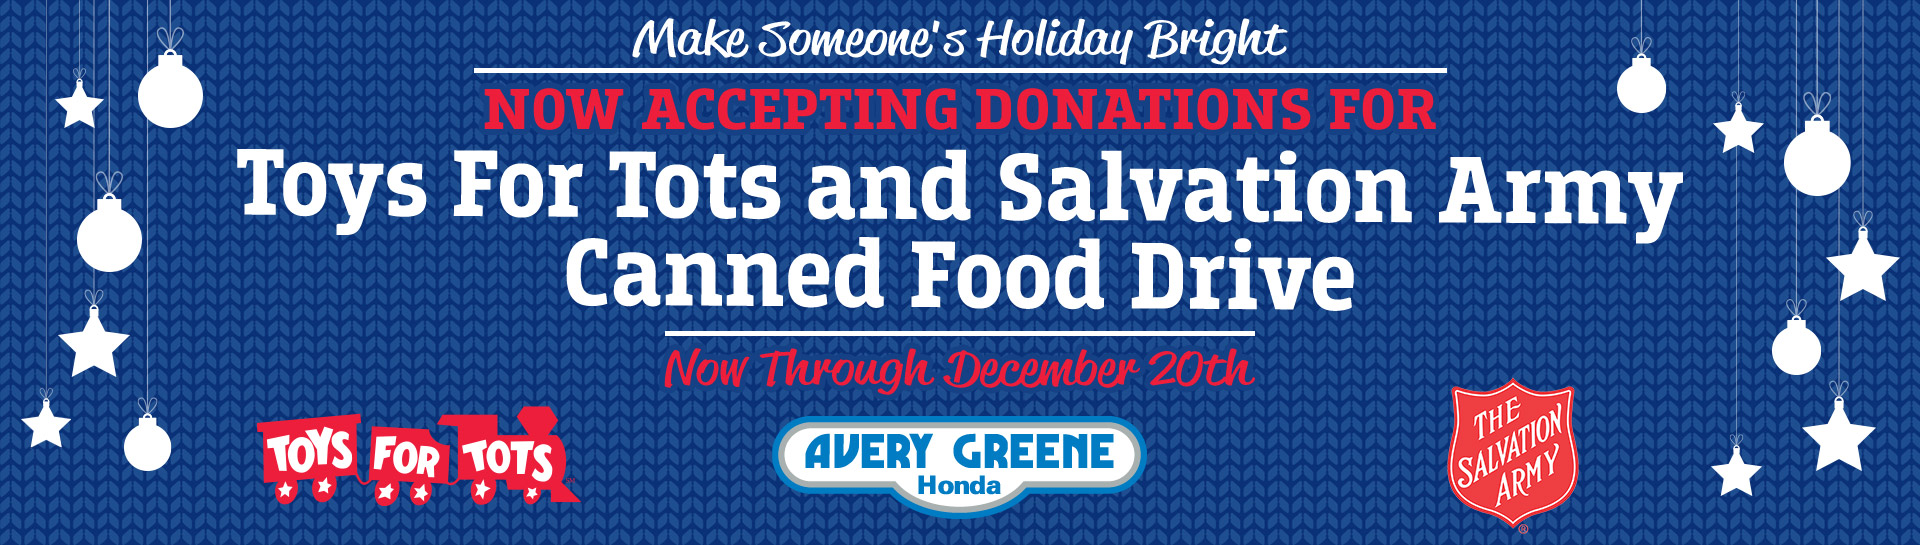 Toys For Tots & Salvation Army Canned Food Drive Donation Drop-Off